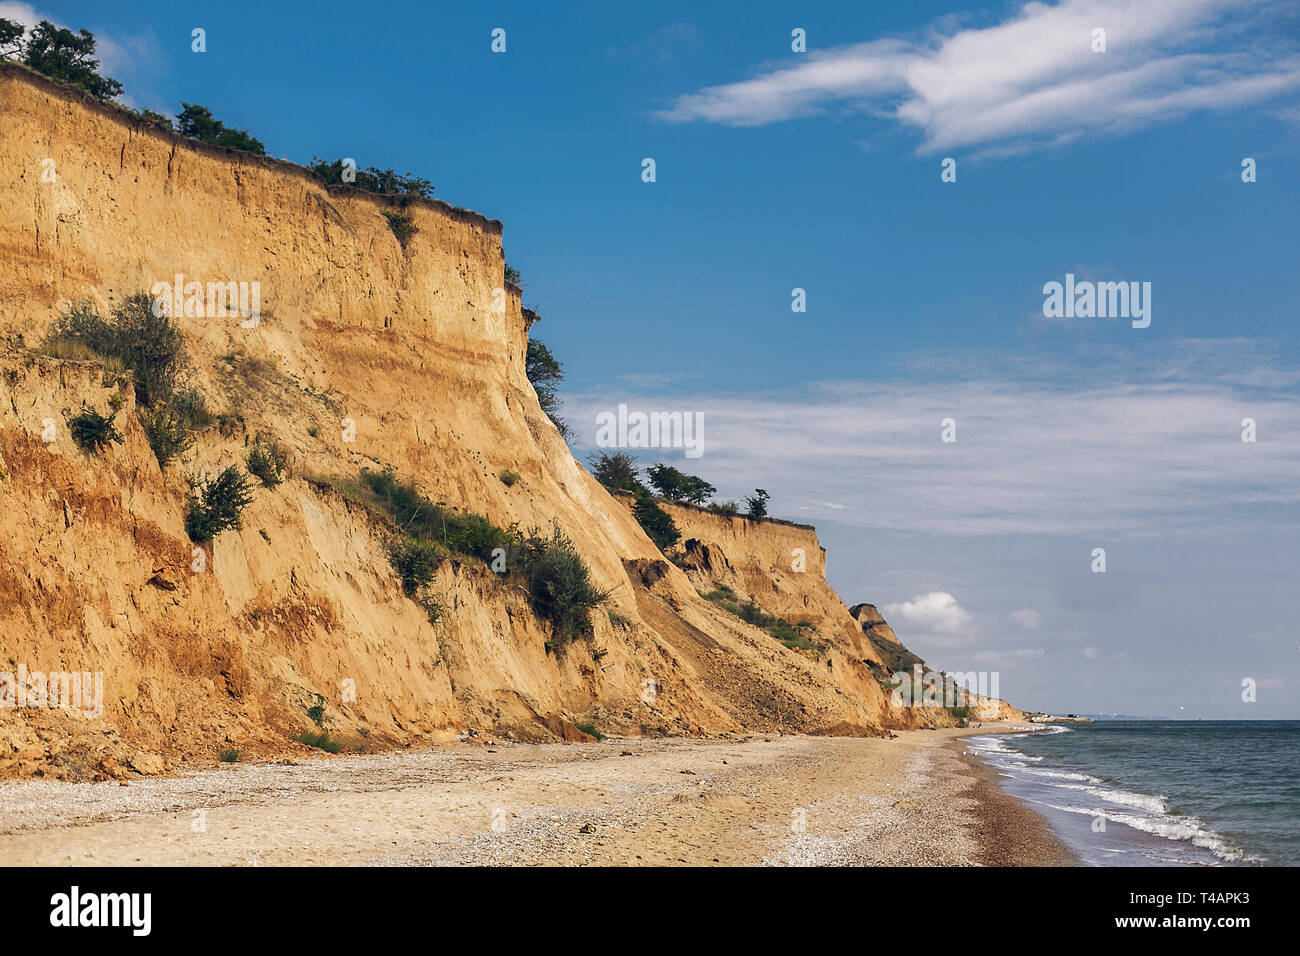 Beautiful view of sandy cliff near sea beach. Landscape of beach cliff and waves in sunny weather. Summer vacation concept. Exploring interesting plac Stock Photo